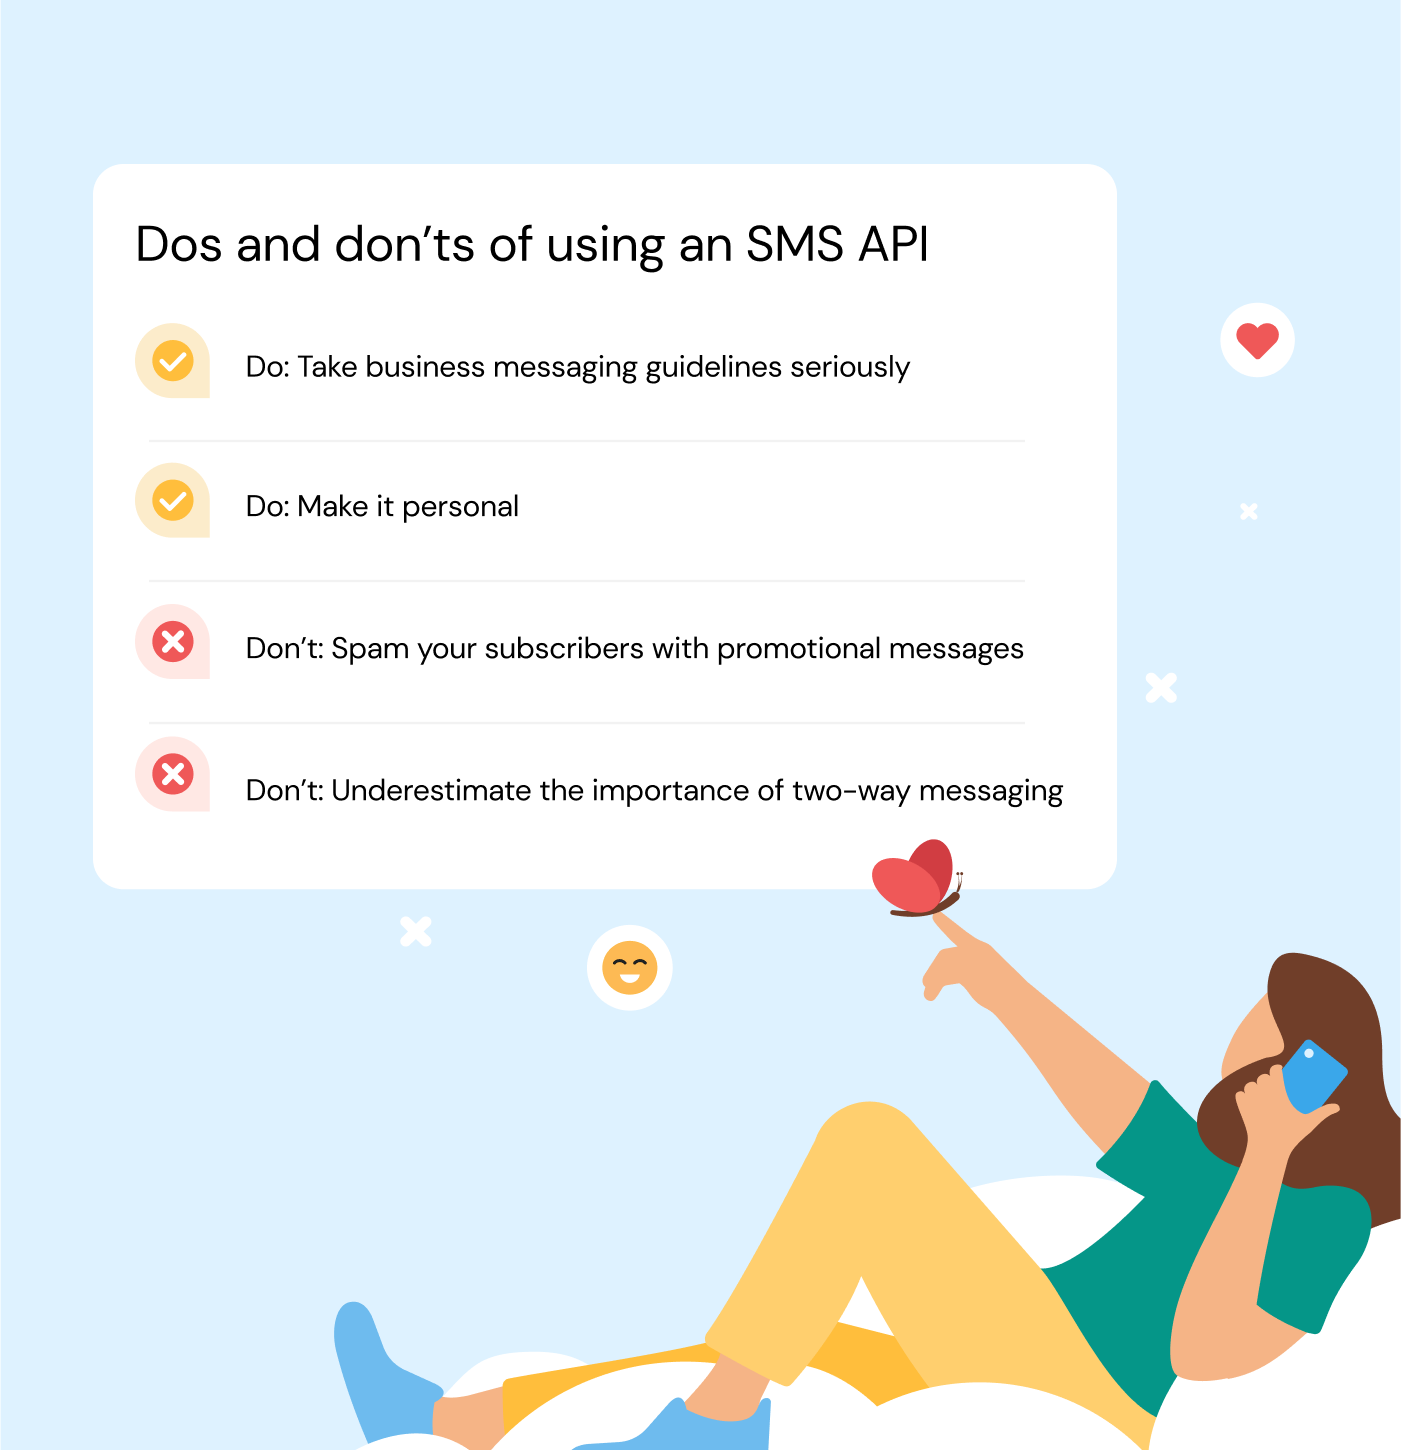 What is an SMS API - Do's and don'ts